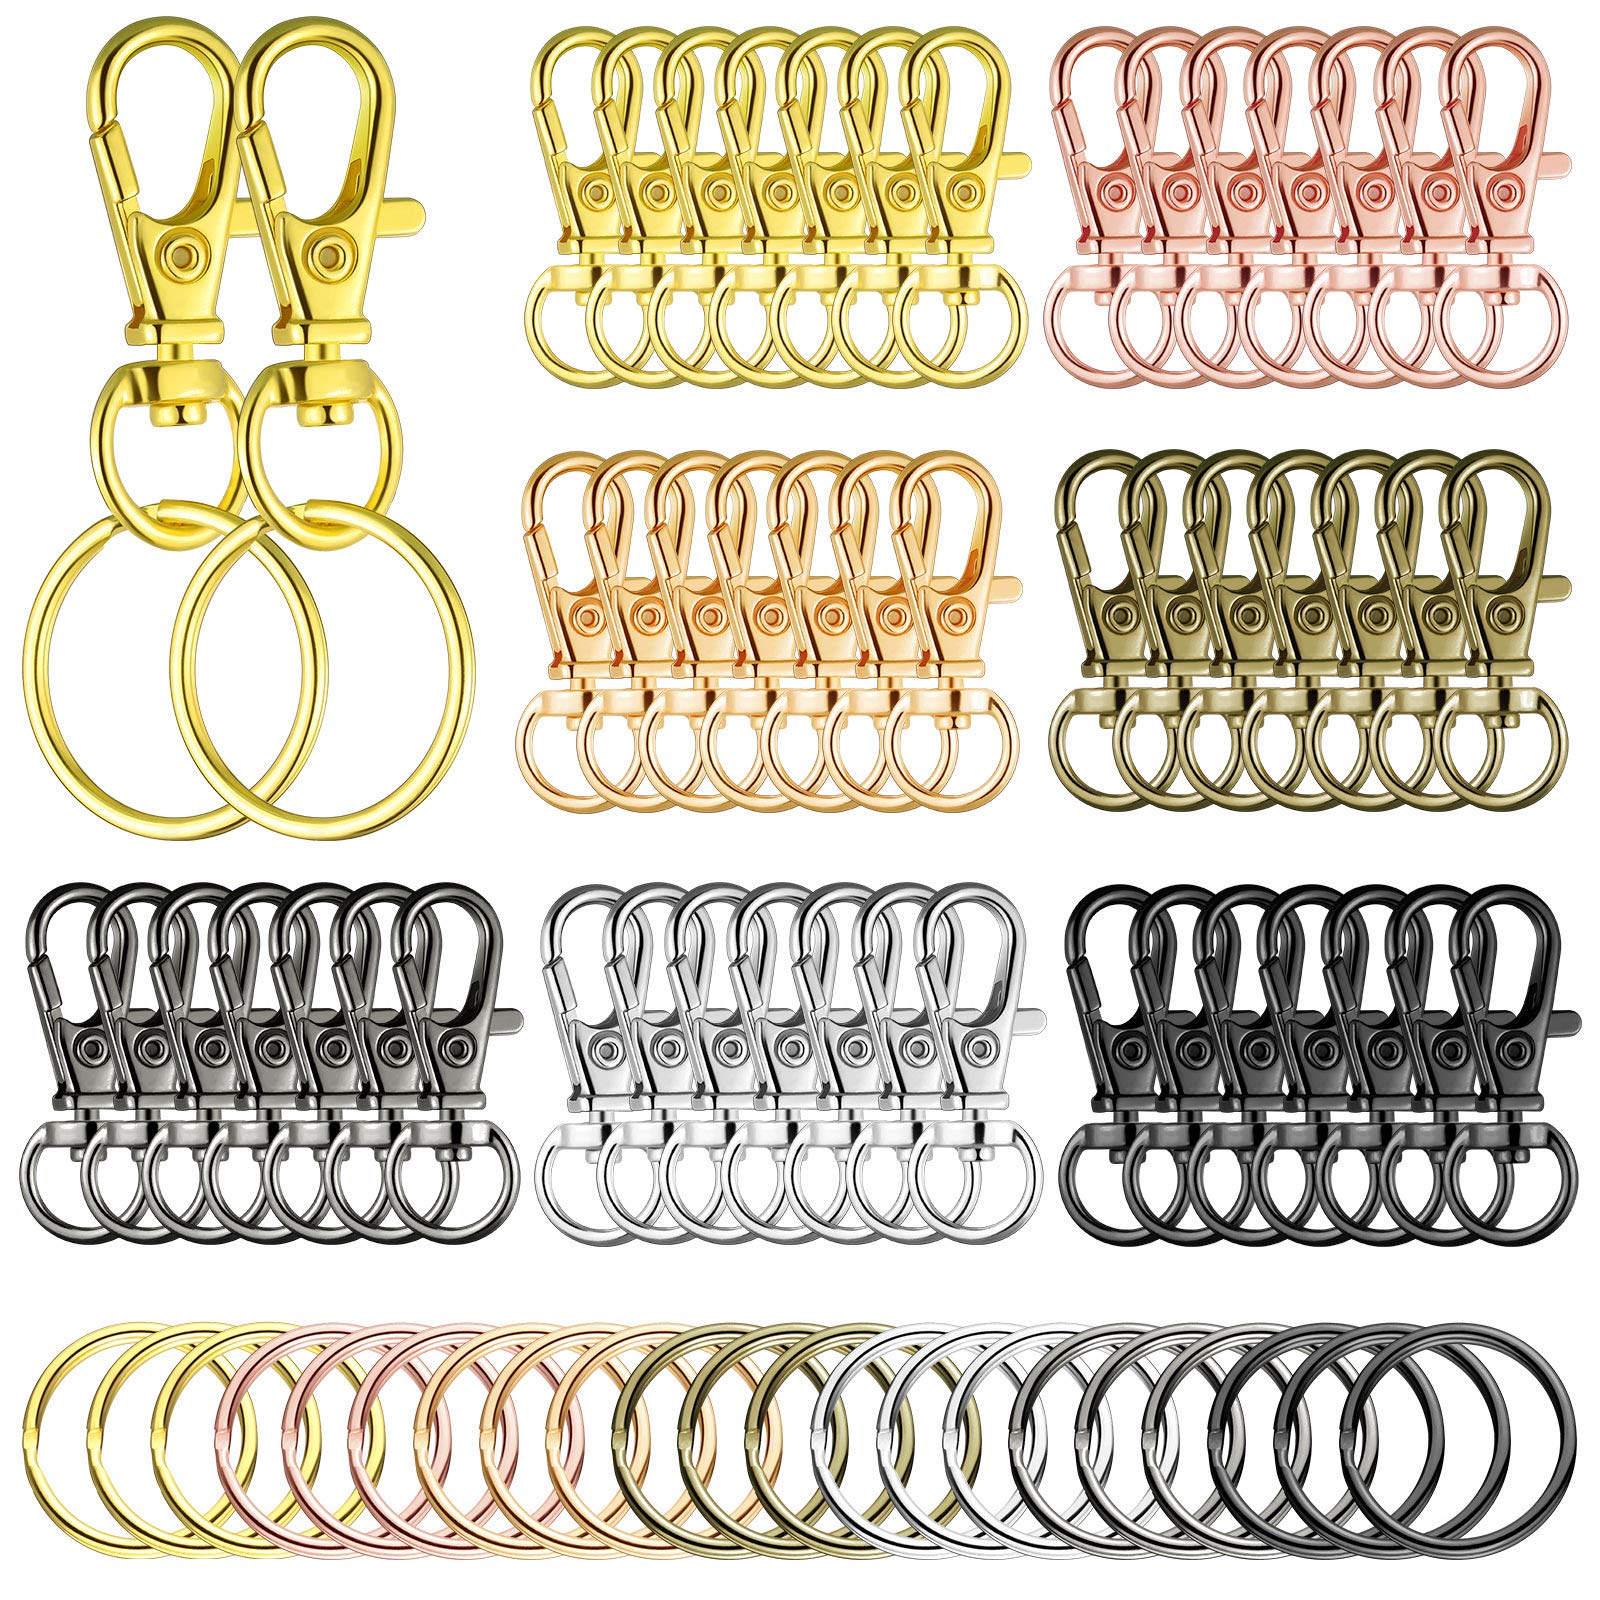 1, 10, 50 or 100 Premium Quality Alloy Lobster Claw Clasps Lanyard Key Ring  Crafts Badge Holder Jewelry Supply Ships From USA 